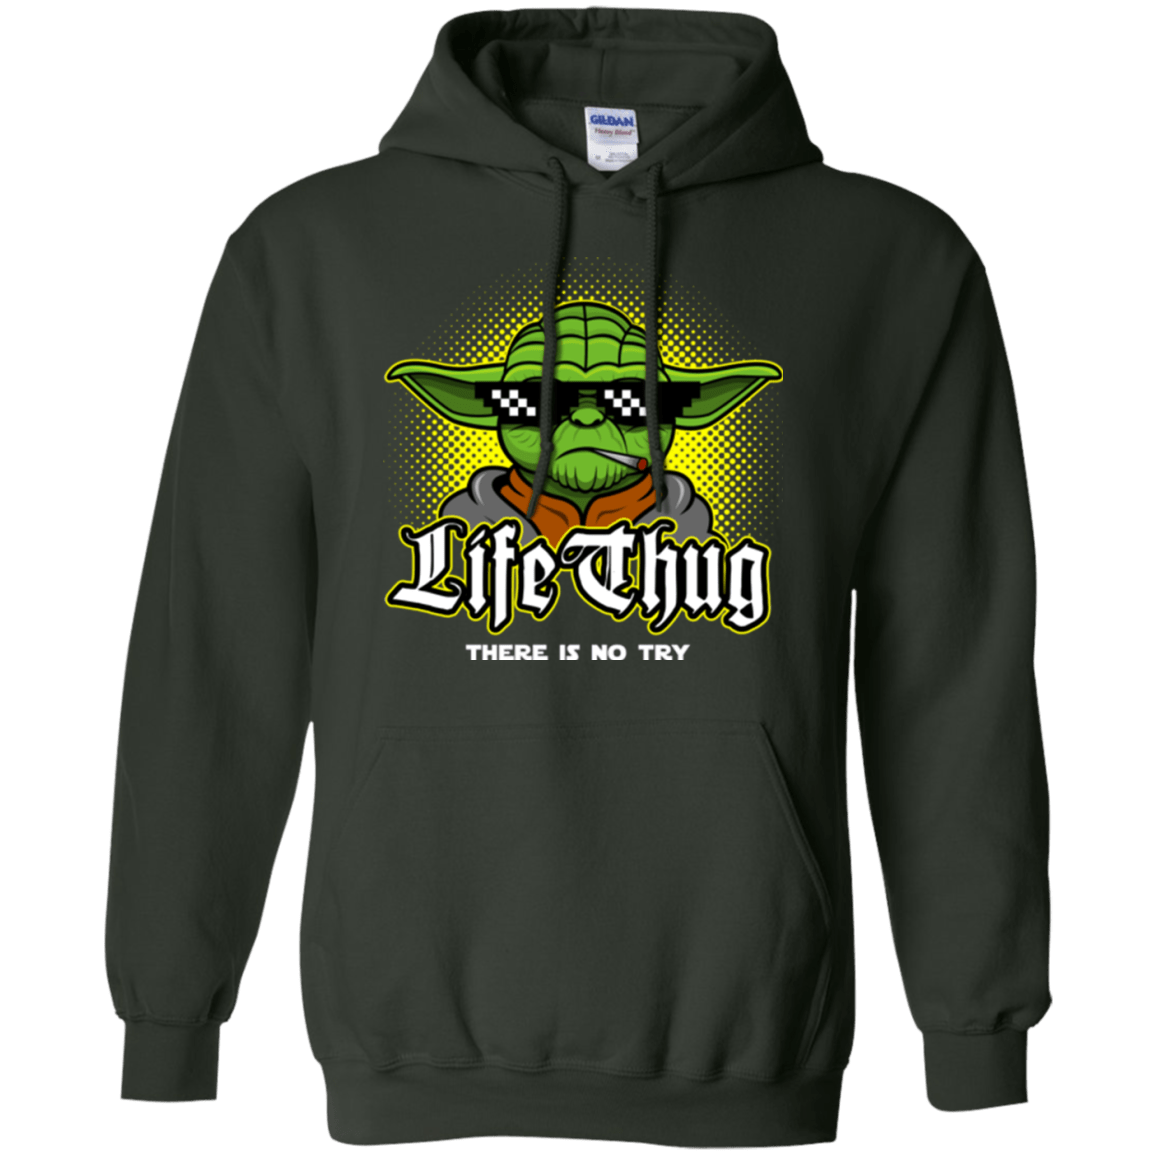 Sweatshirts Forest Green / Small Life thug Pullover Hoodie